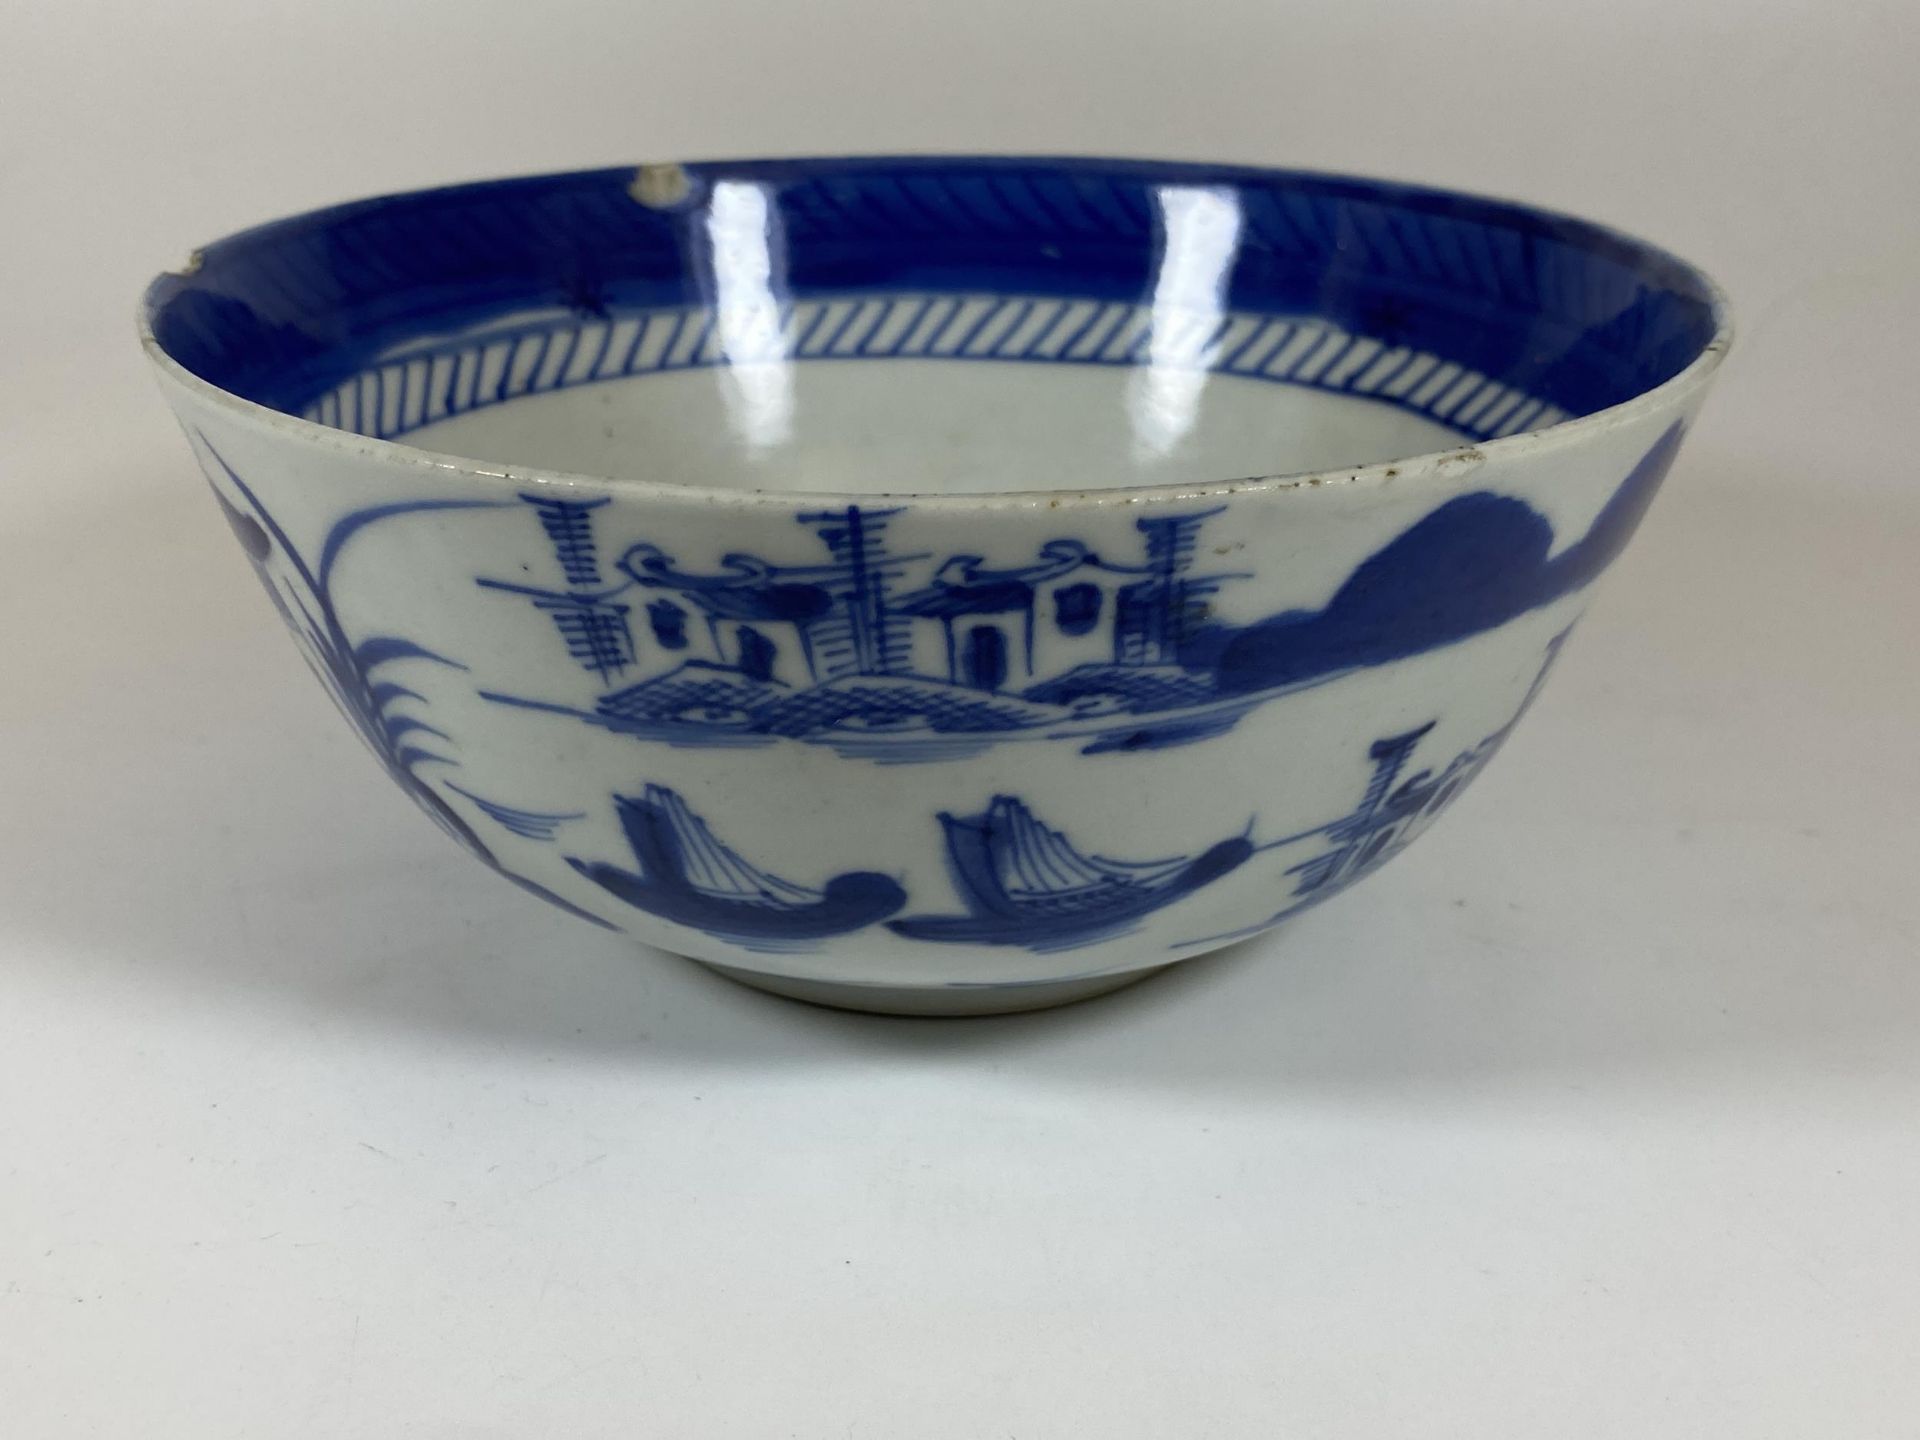 A 19TH CENTURY CHINESE BLUE AND WHITE PORCELAIN BOWL WITH PAGODA DESIGN, DIAMETER 17CM - Image 3 of 6